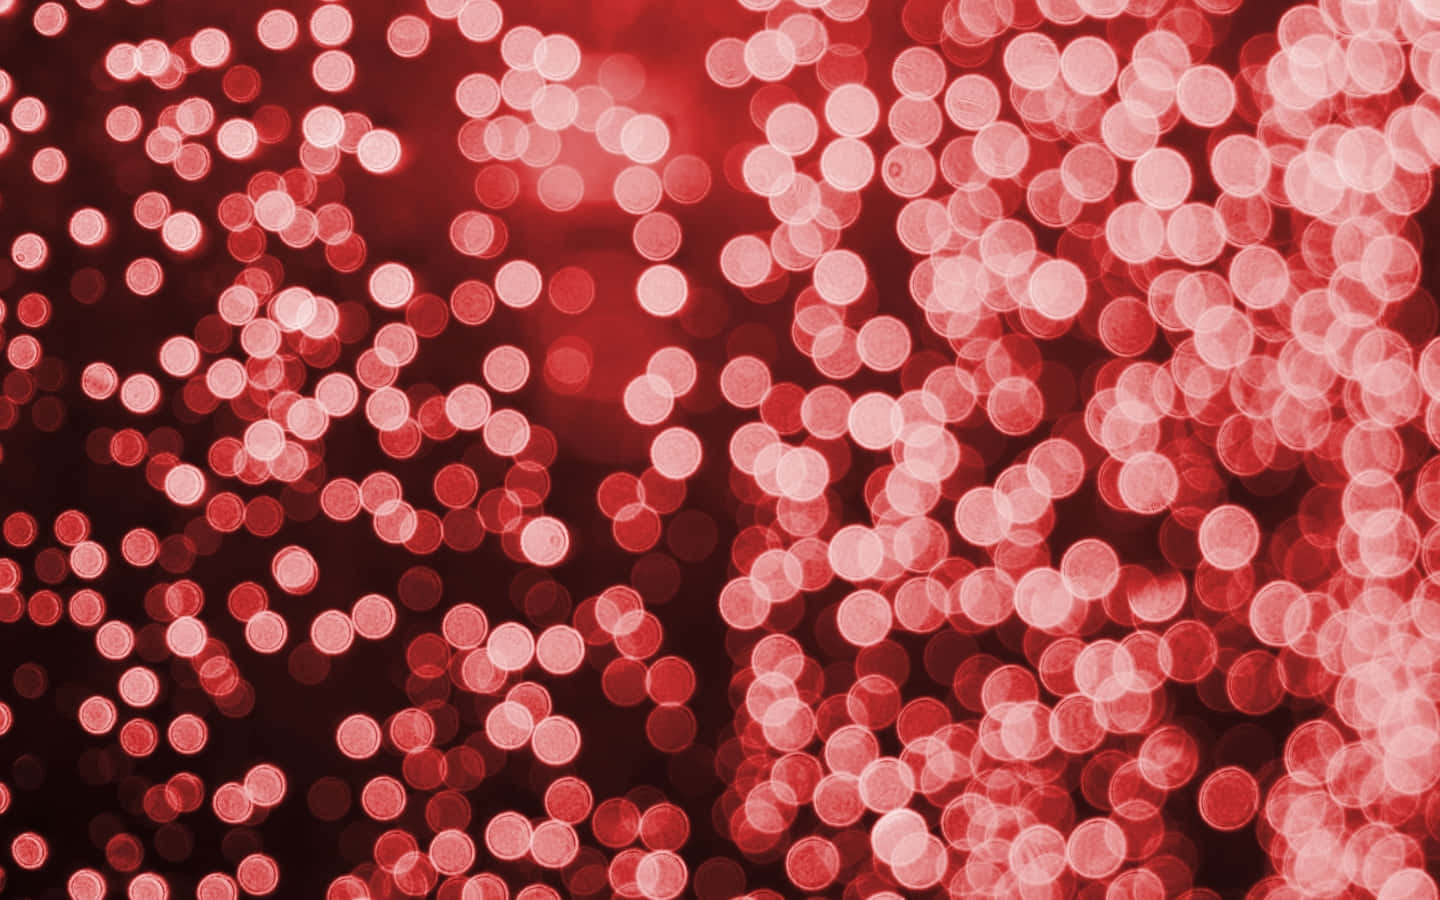 Make your background sparkle with this magical bokeh design